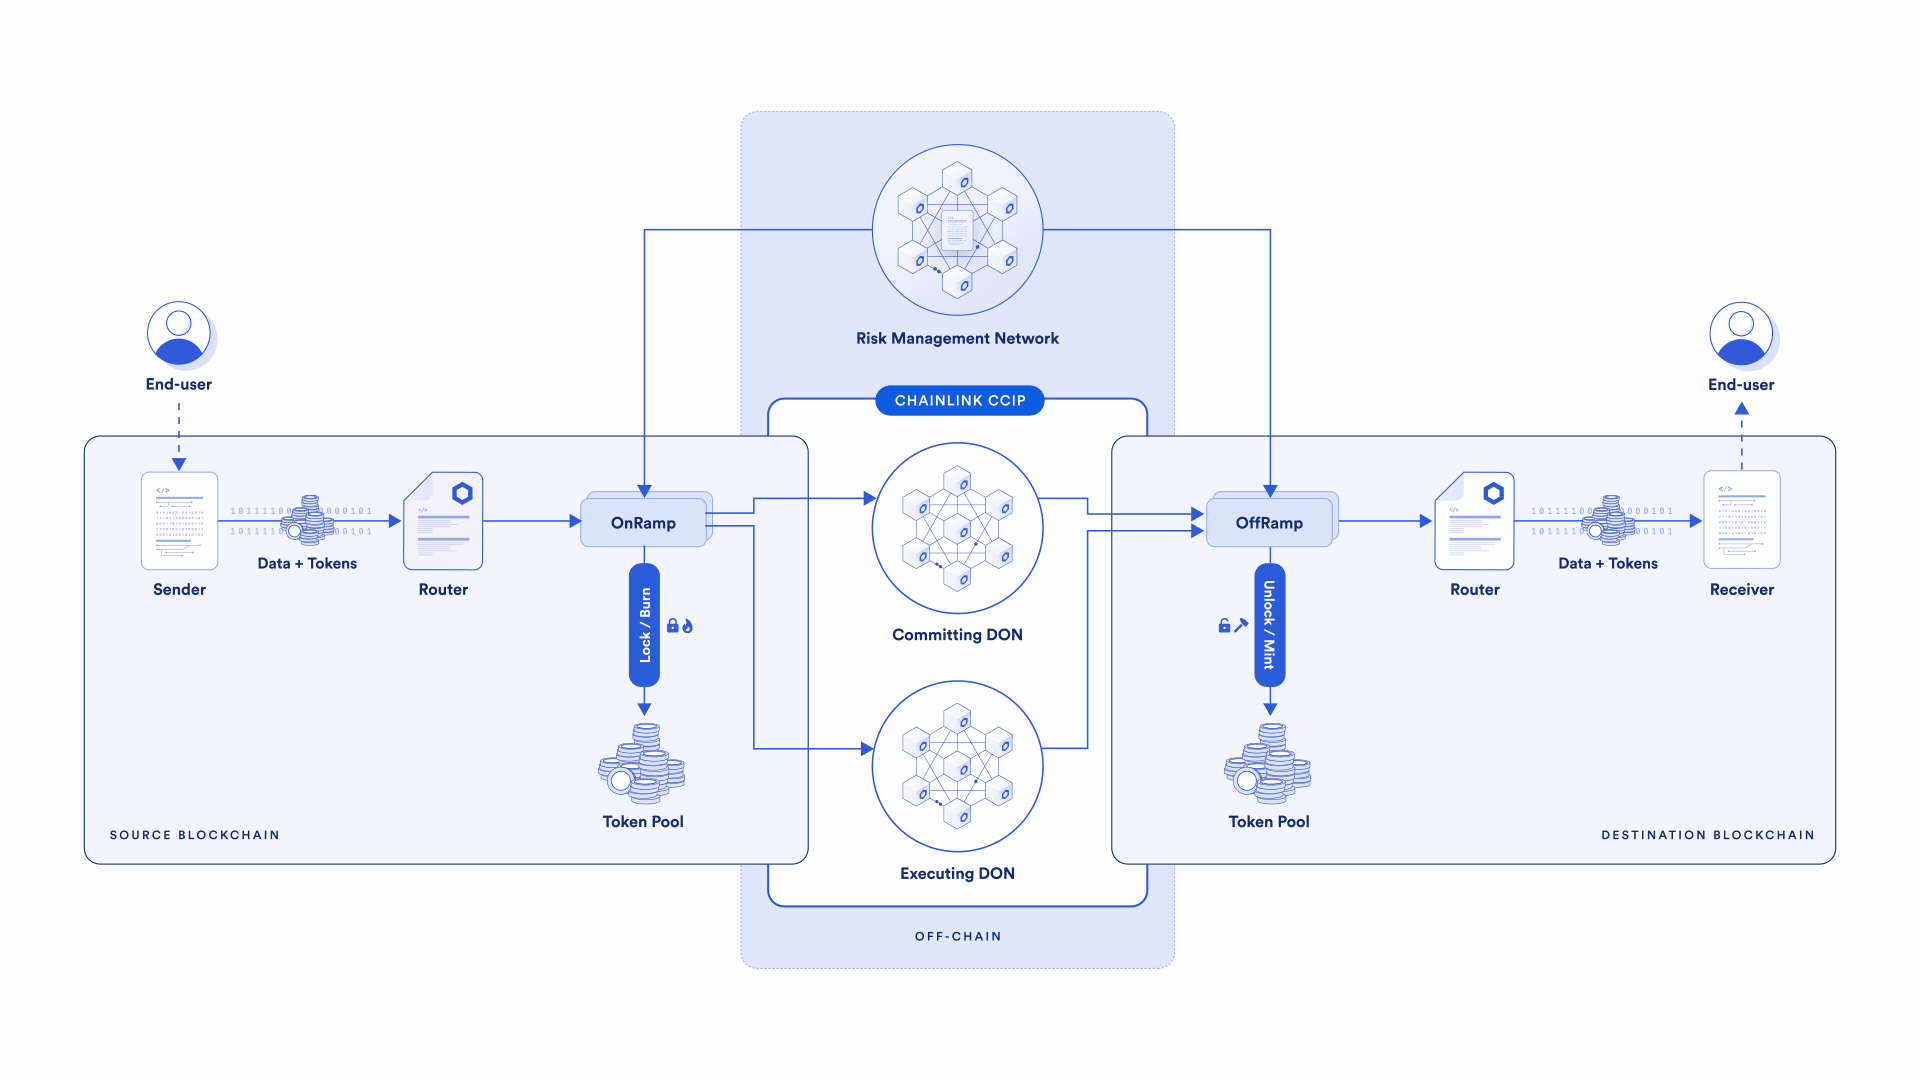 CCIP connects applications across various public and private blockchains to enable an interconnected Web3.